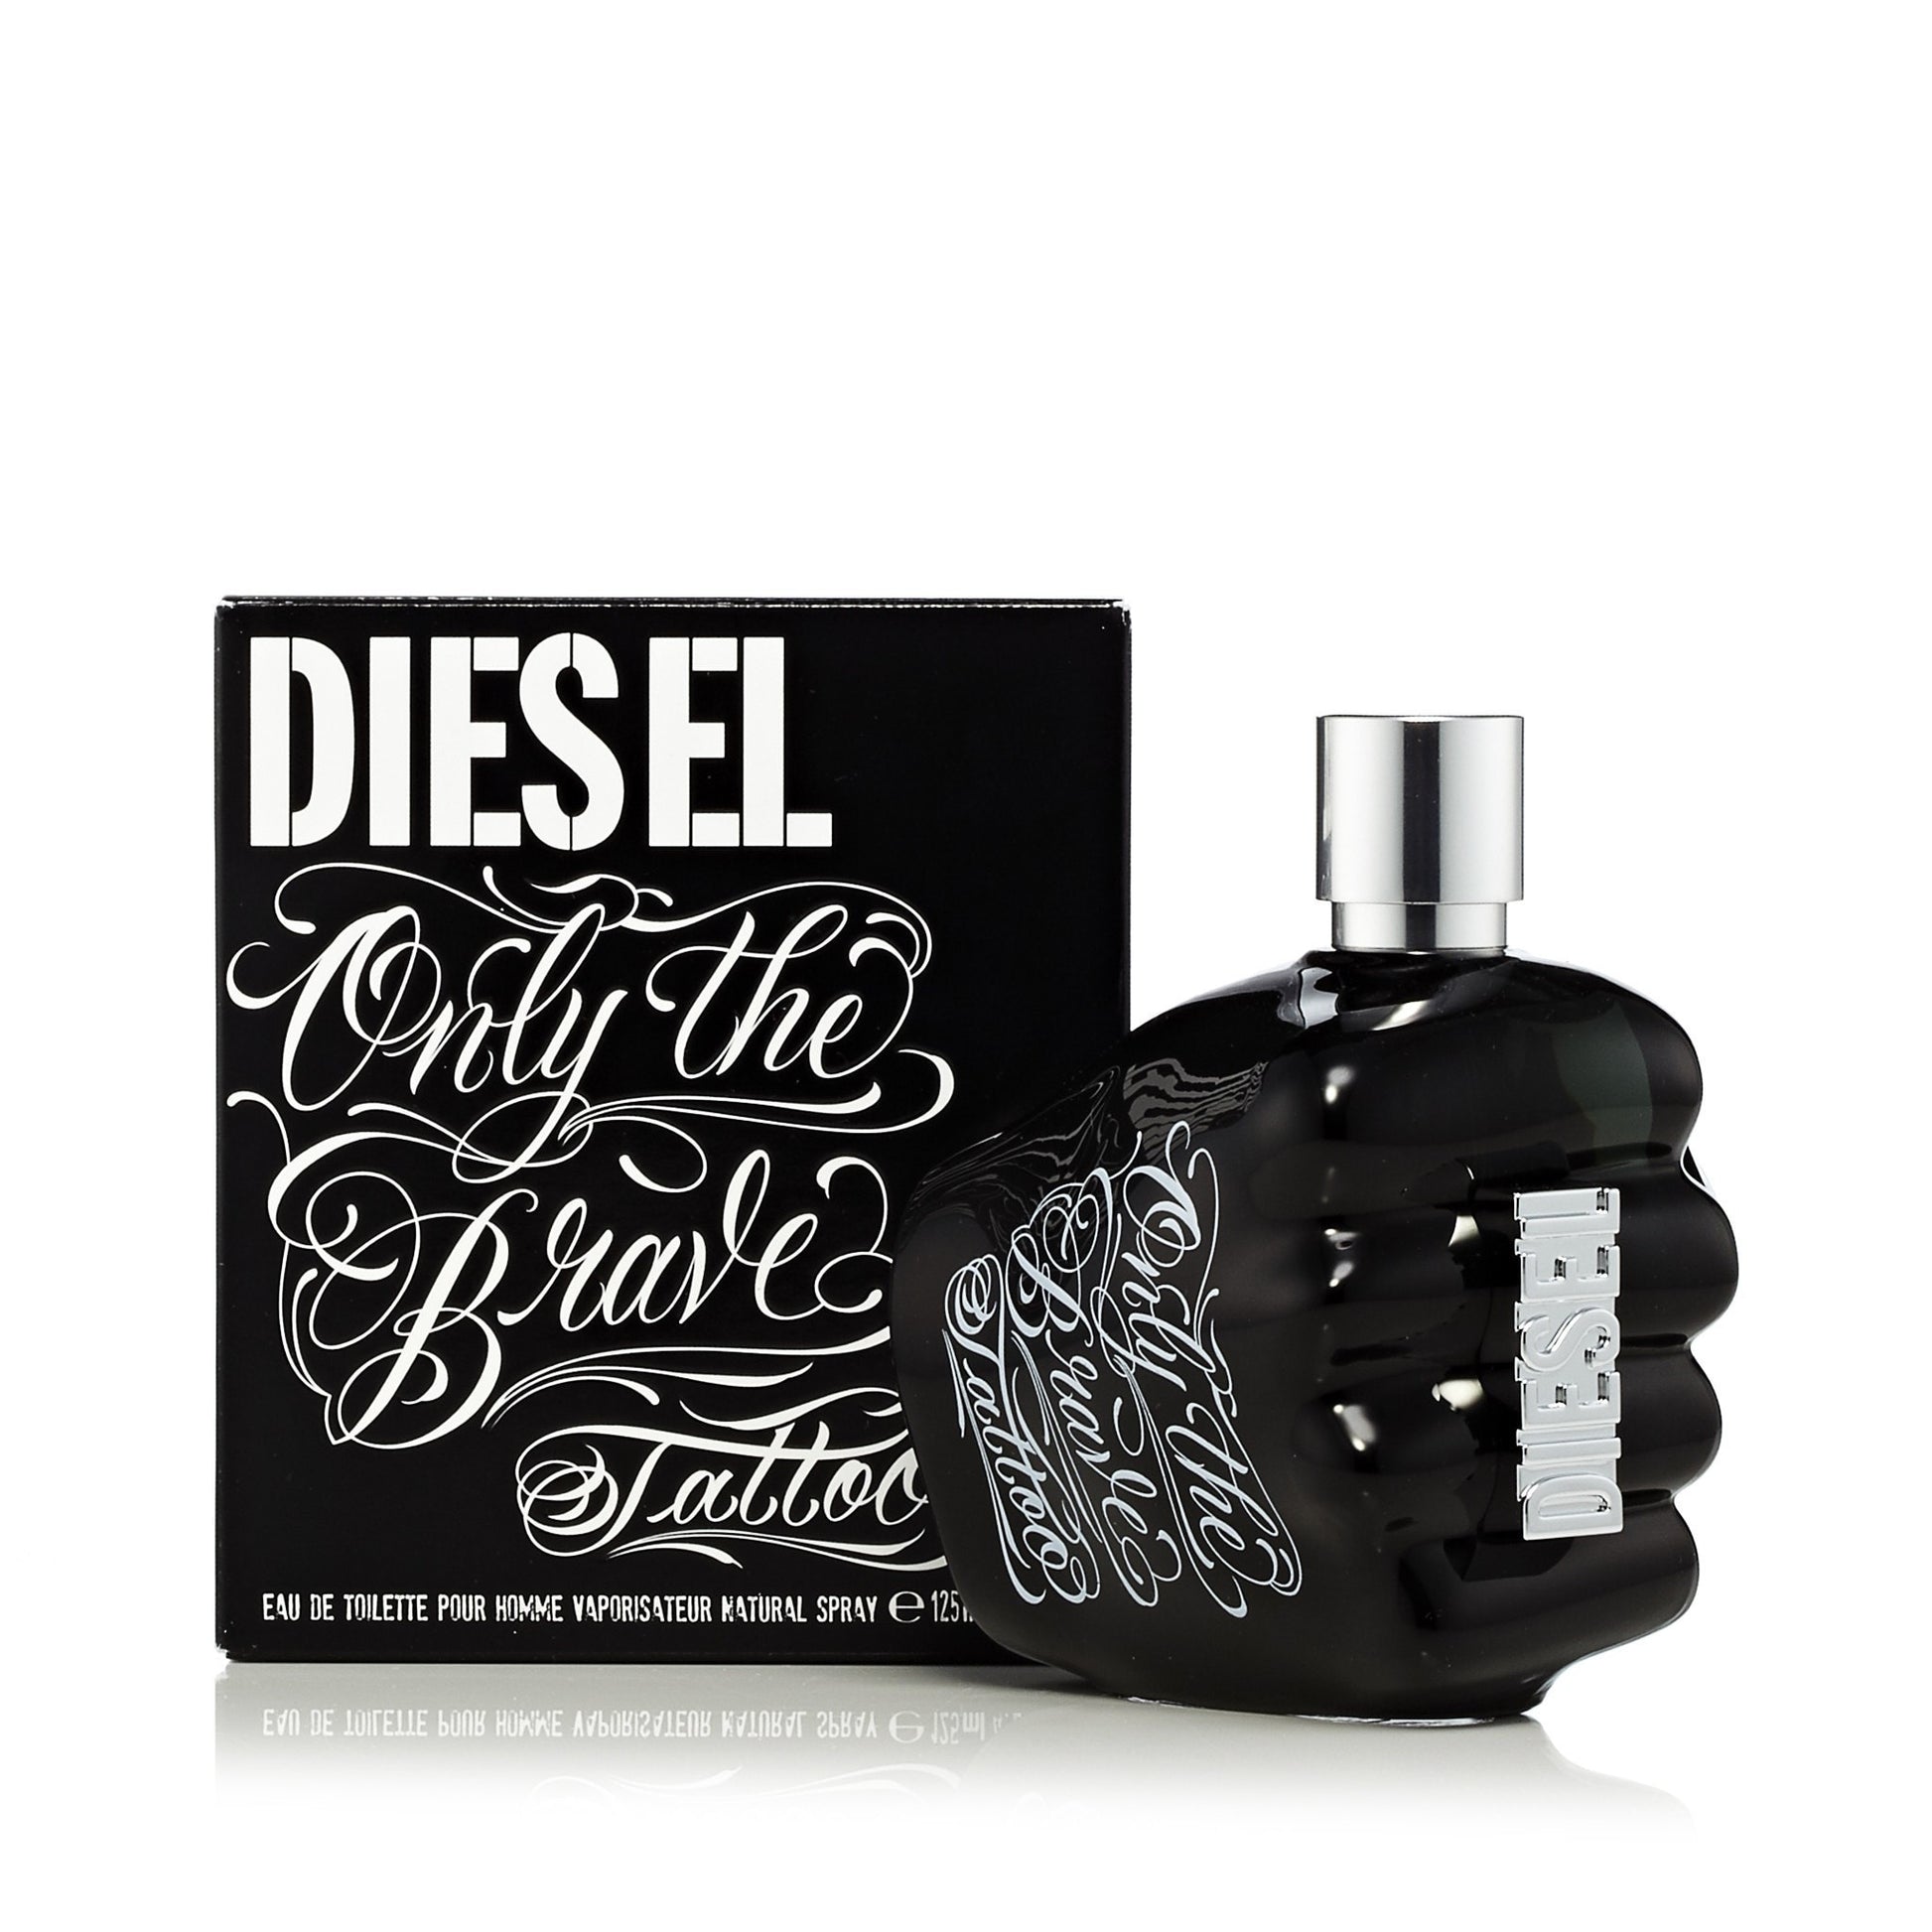 Only The Brave Tattoo Eau de Toilette Spray for Men by Diesel 4.2 oz. Click to open in modal